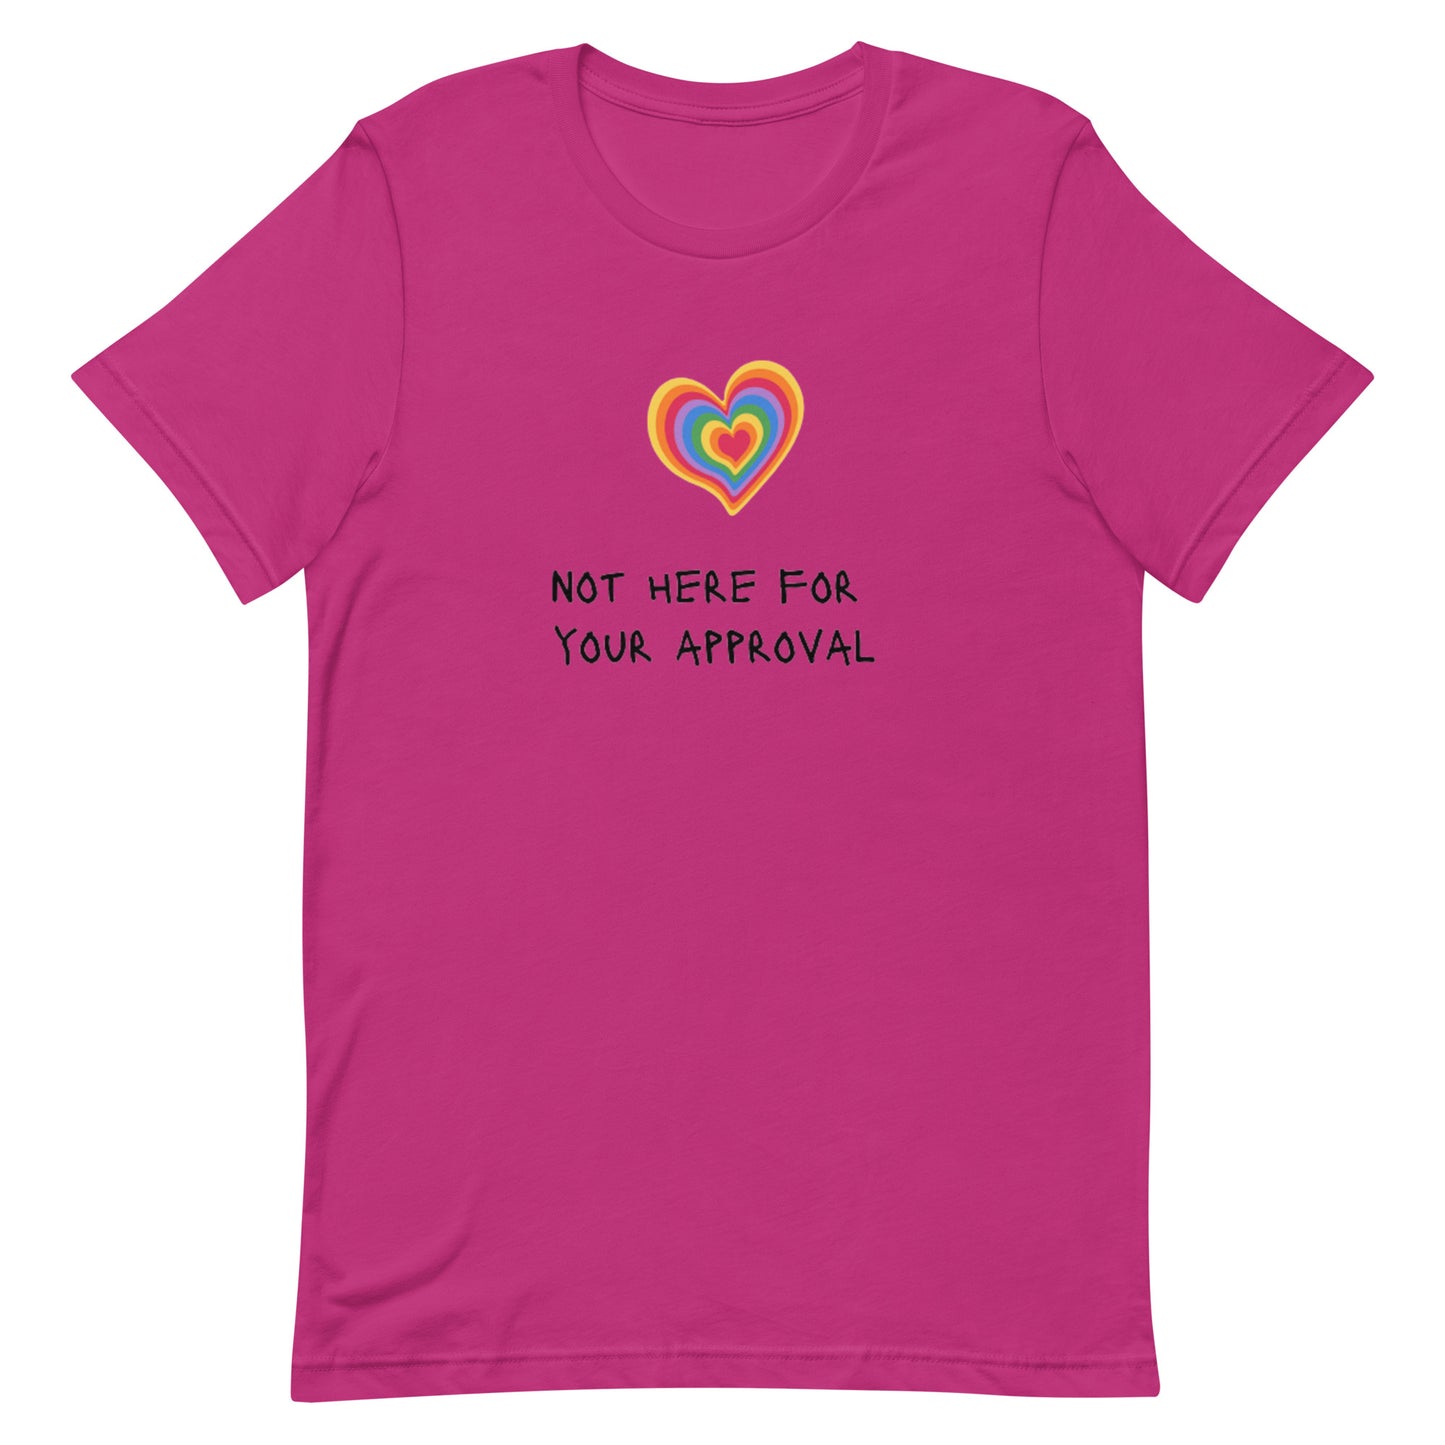 Not Here For Your Approval Women's T-Shirt